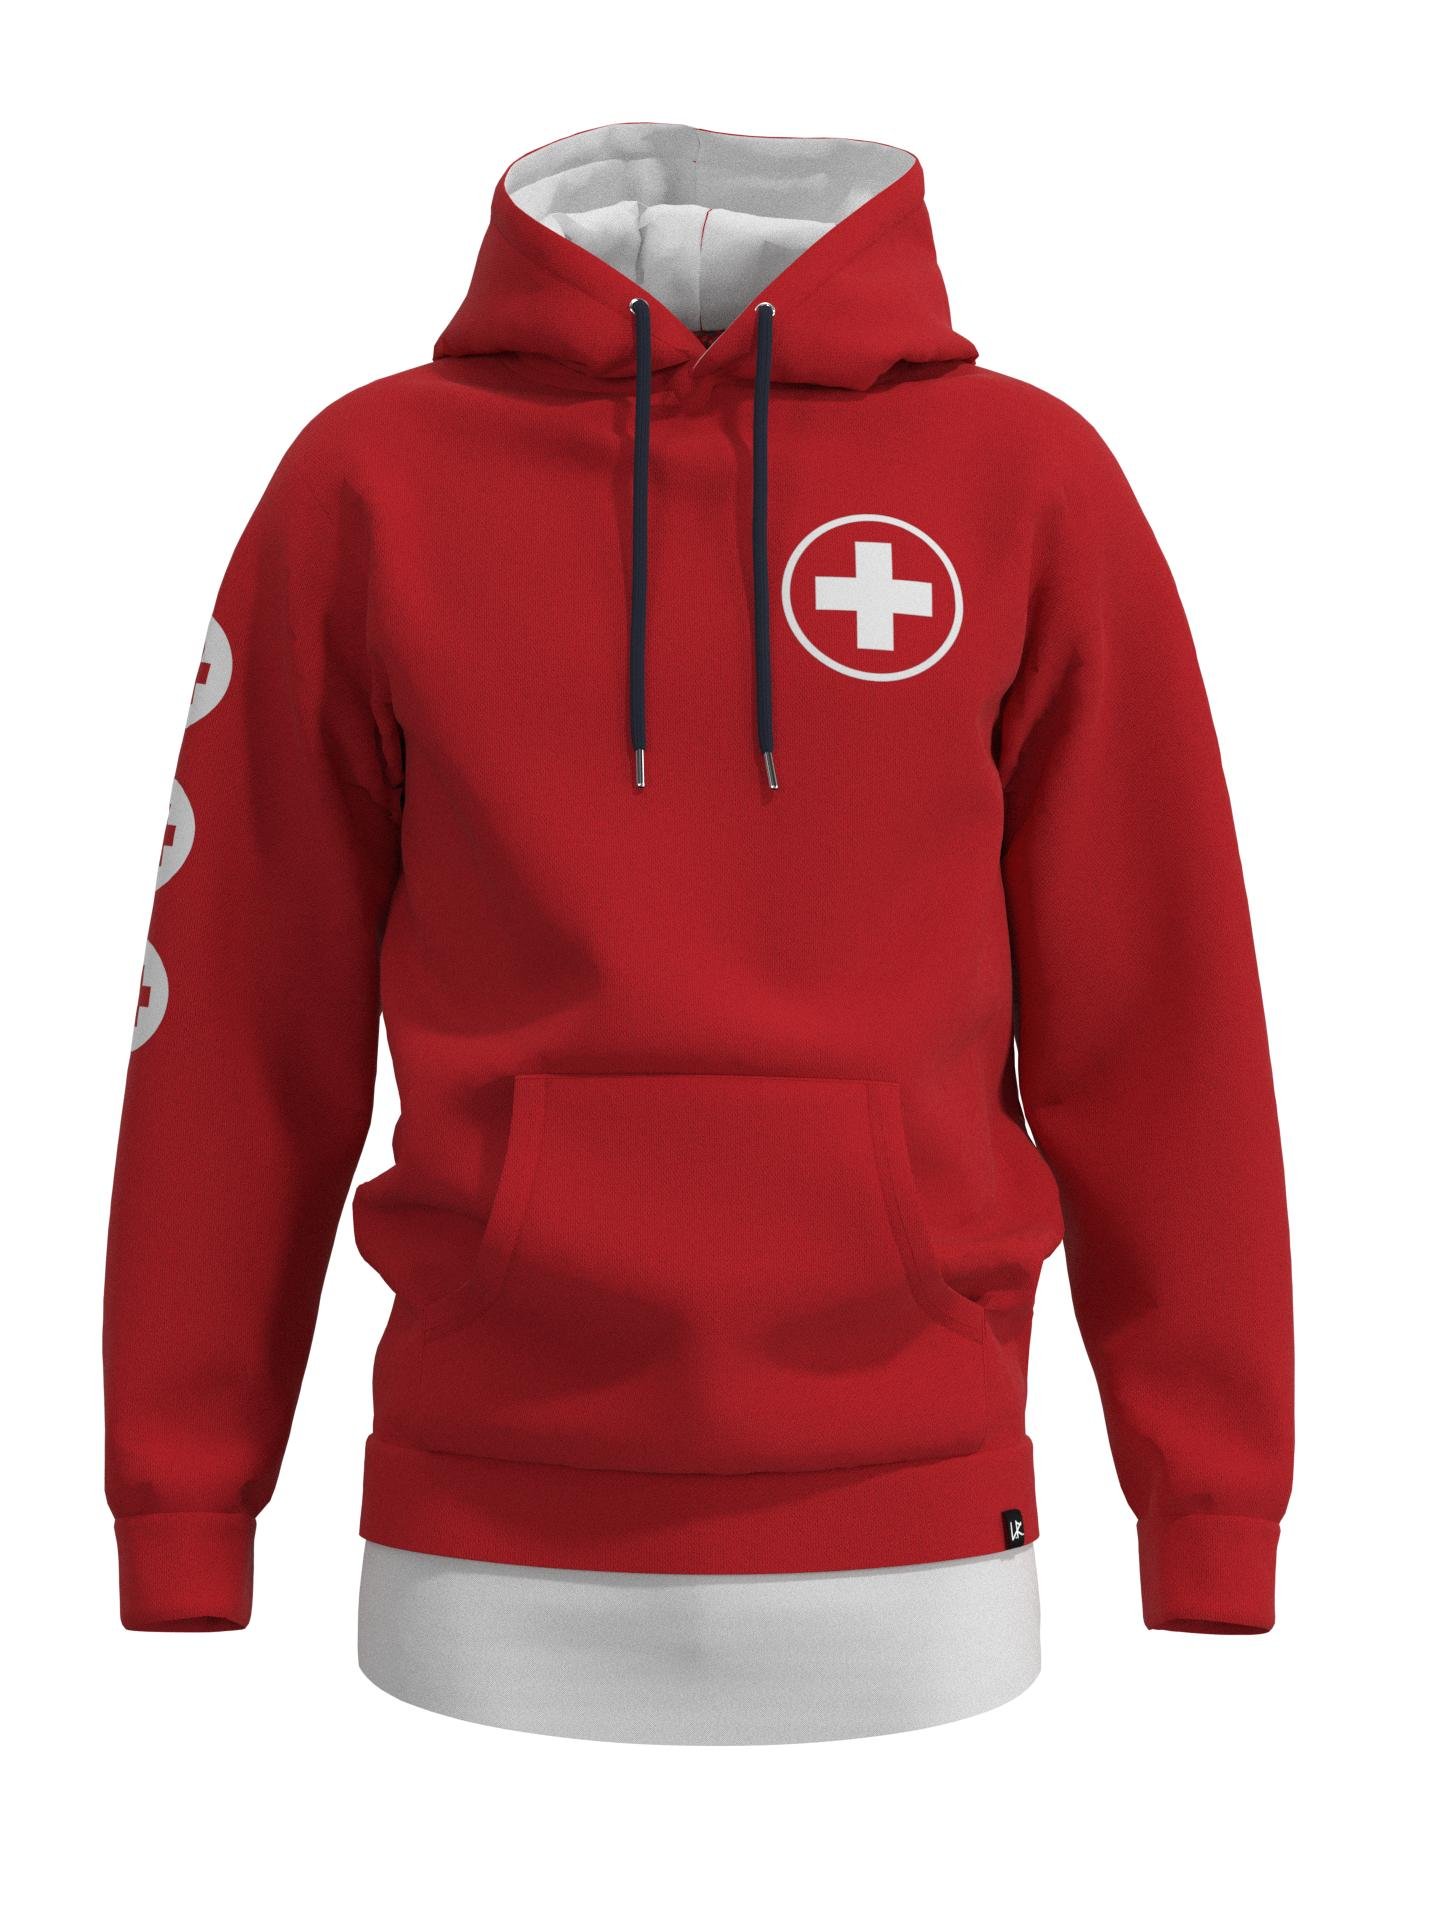 HOODIE-LAYERED_DIEGO_RED-BLACK by L.R.CPH